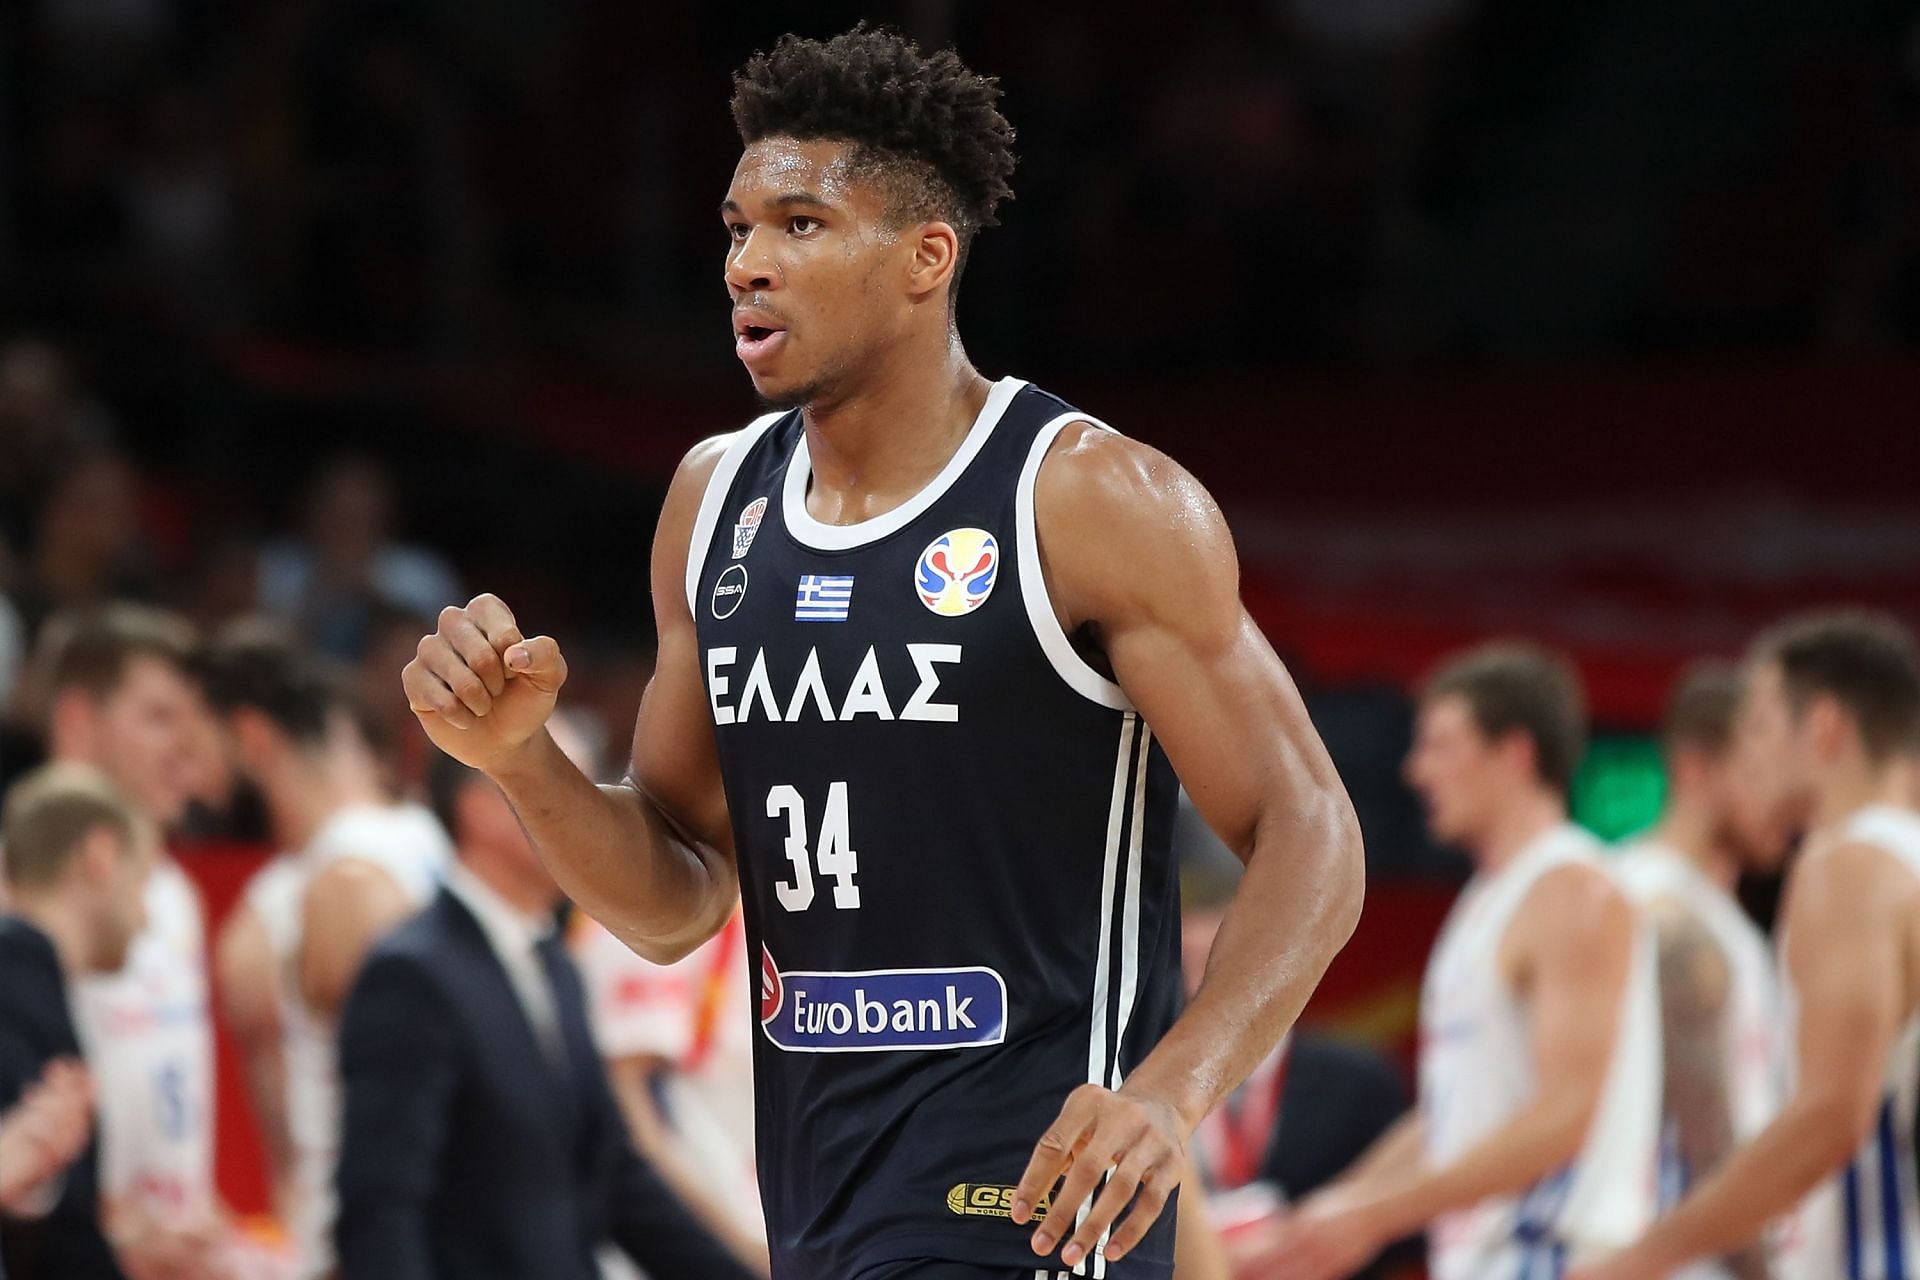 Giannis Antetokounmpo playing for the Greece national team